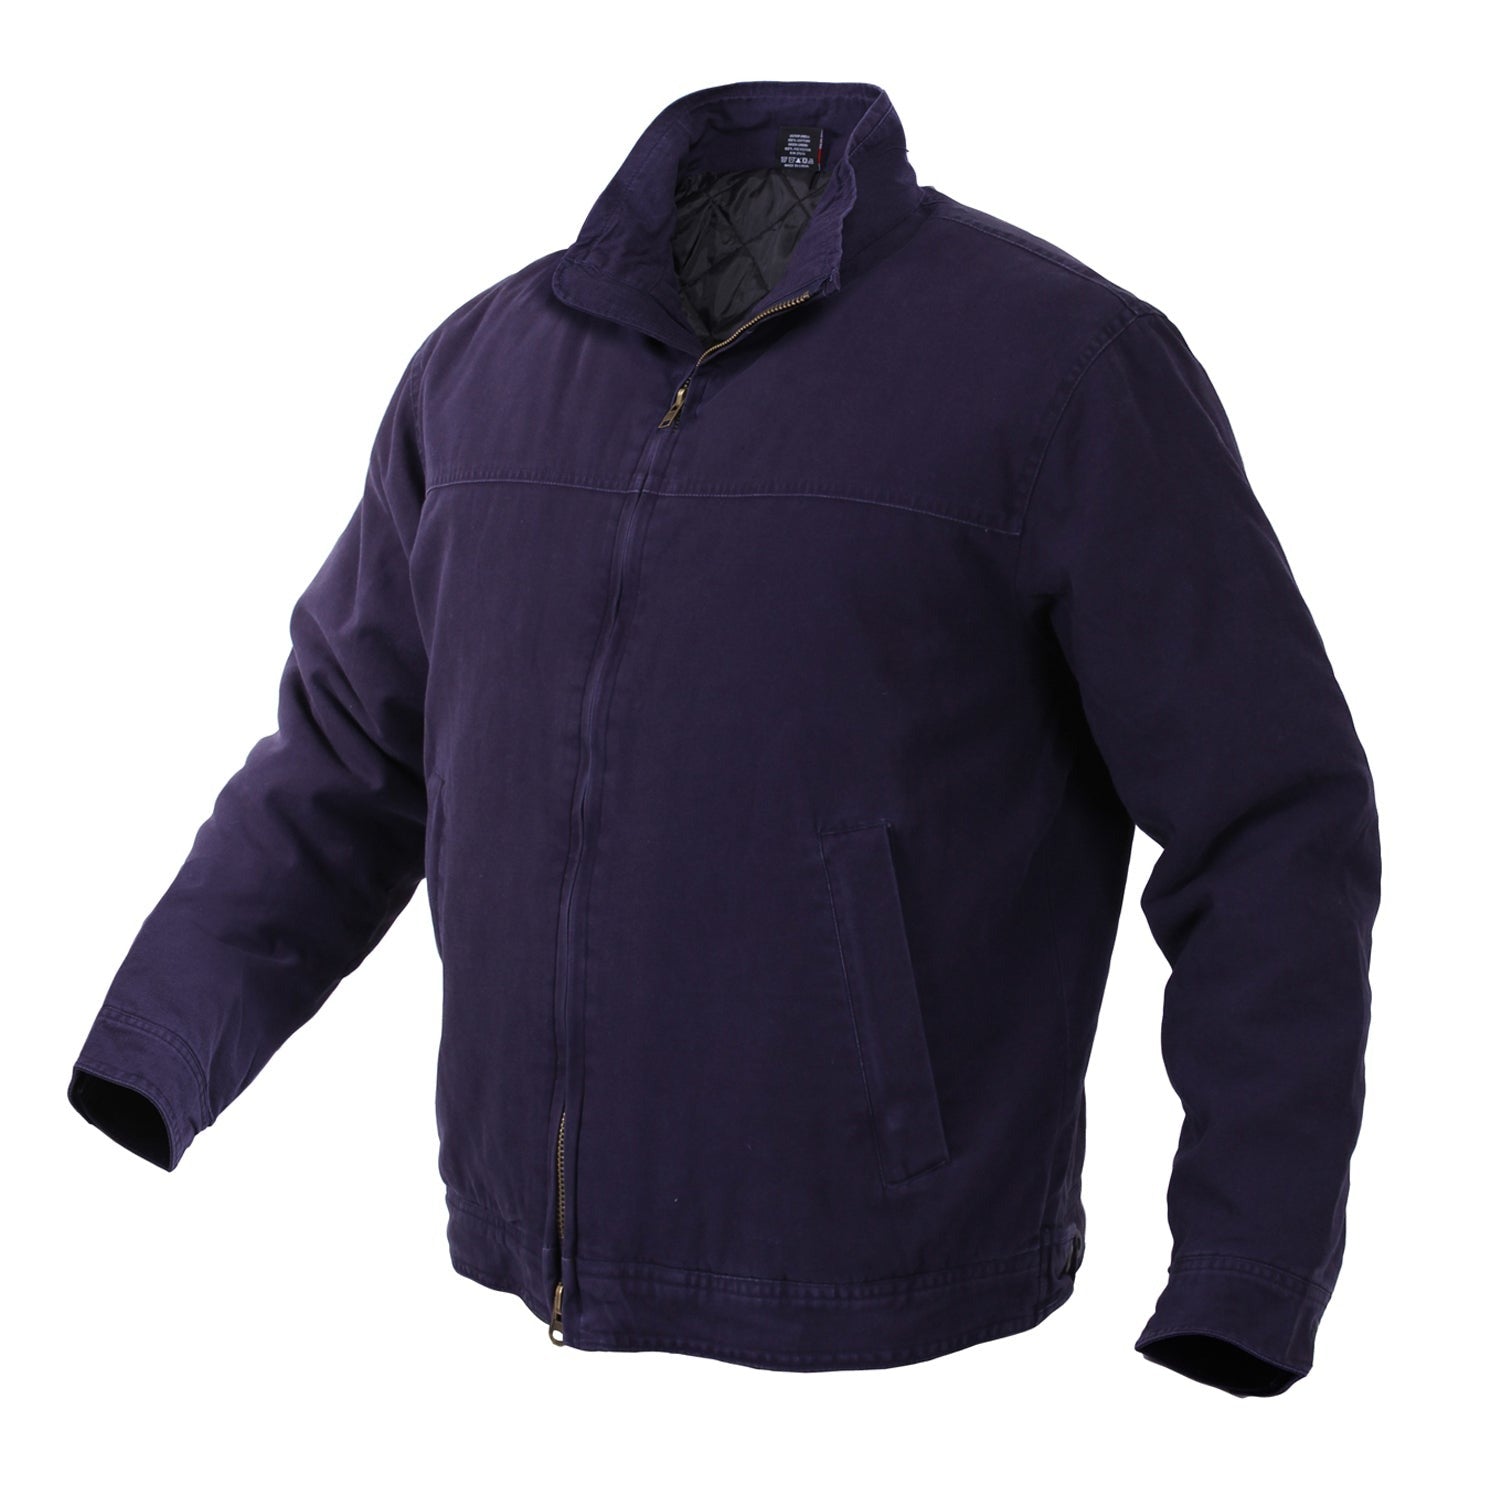 Concealed Carry 3 Season Jacket - Tactical Choice Plus